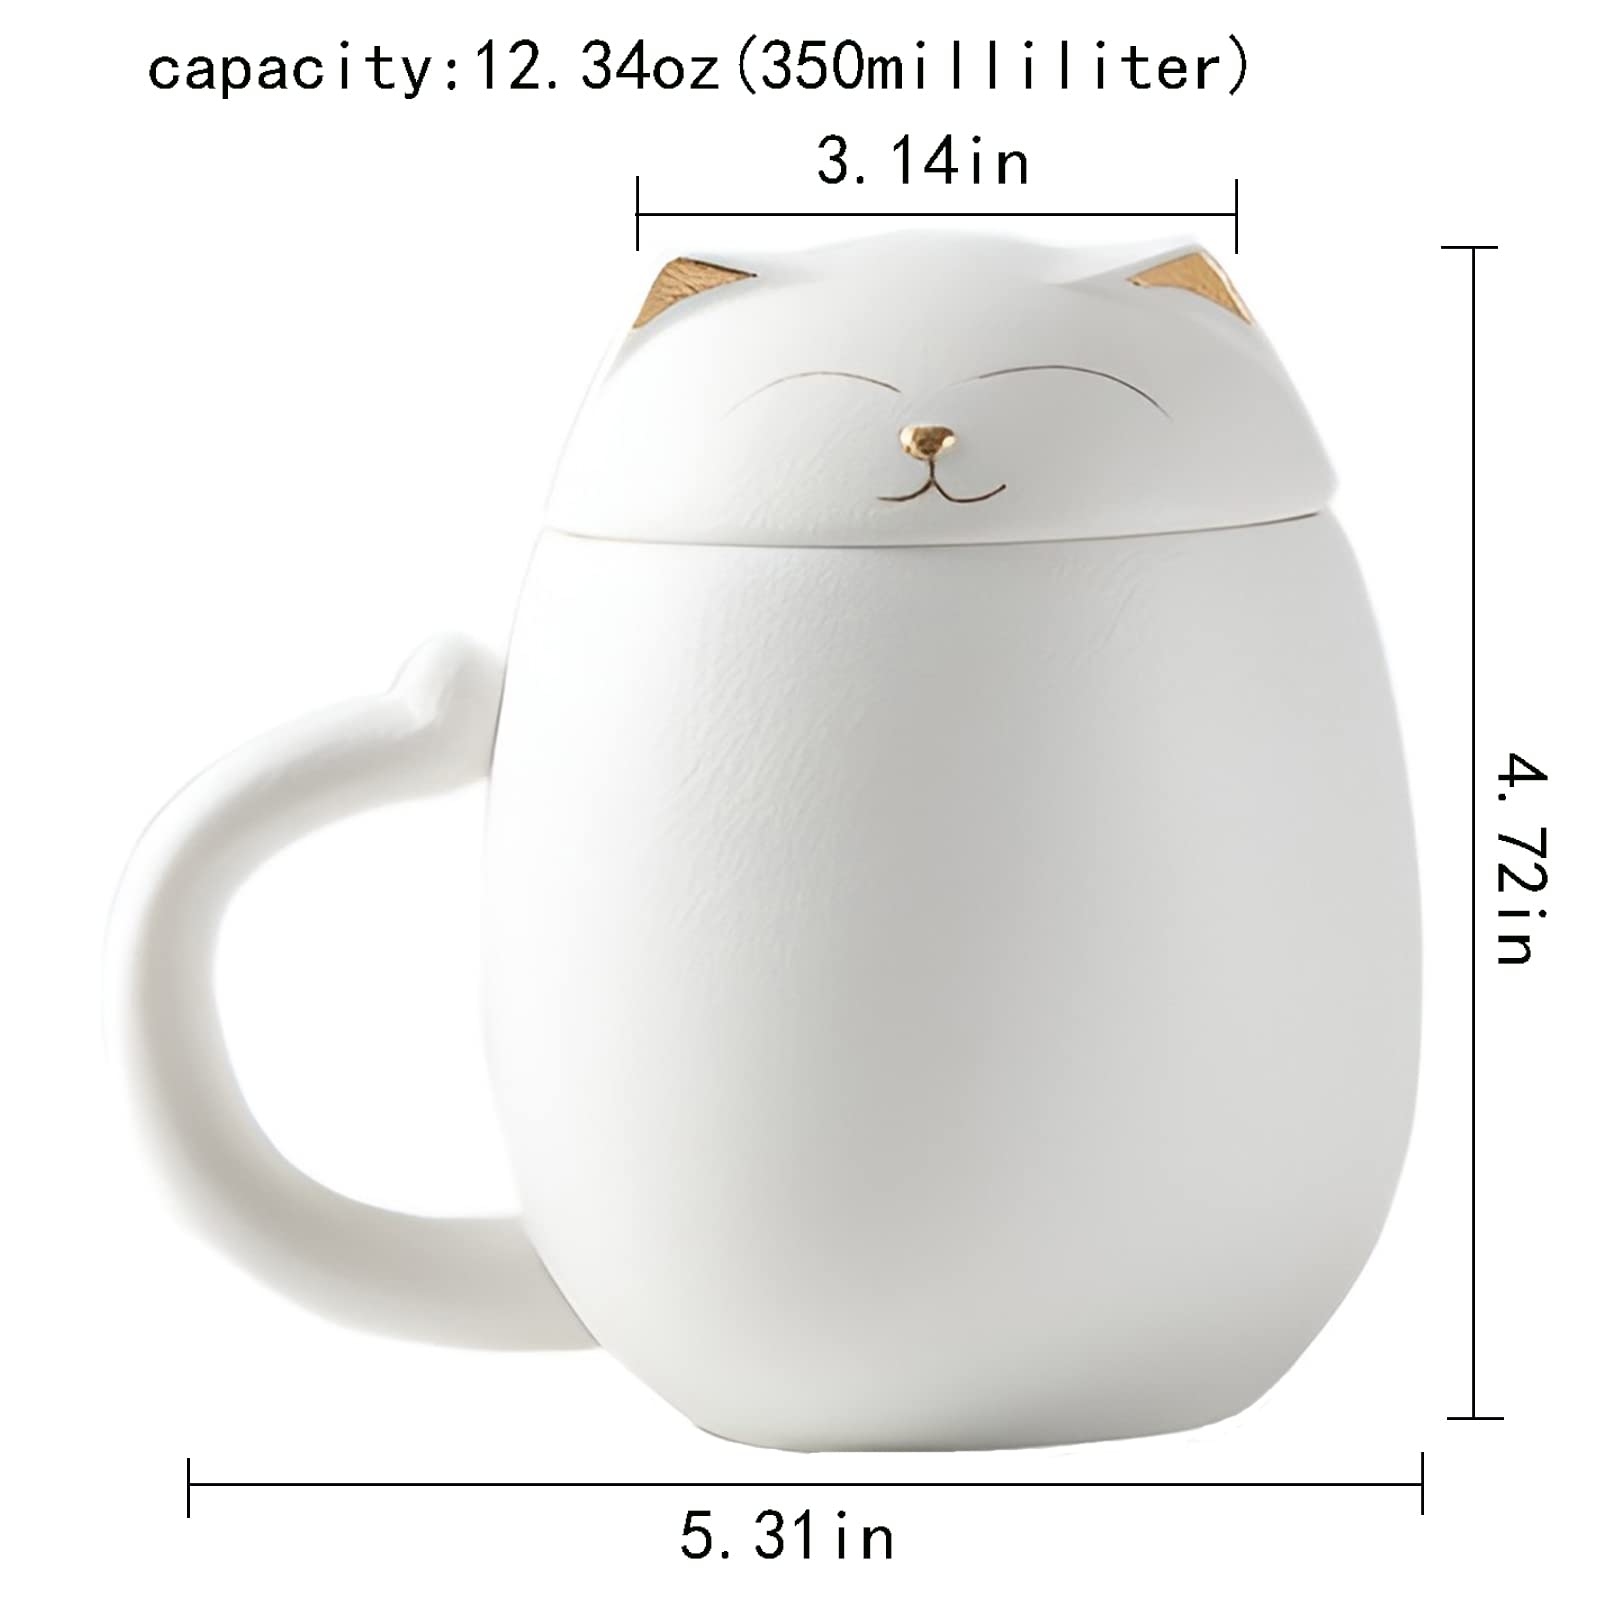 DUANMUL Cat Mug Cute Ceramic Coffee Cup with Infuser and Lid,Filter for Steeping Loose Leaf,kawaii coaster,Novelty Morning Cup Tea Milk Christmas Mug Chinese Handmade Porcelain Teacup(White)